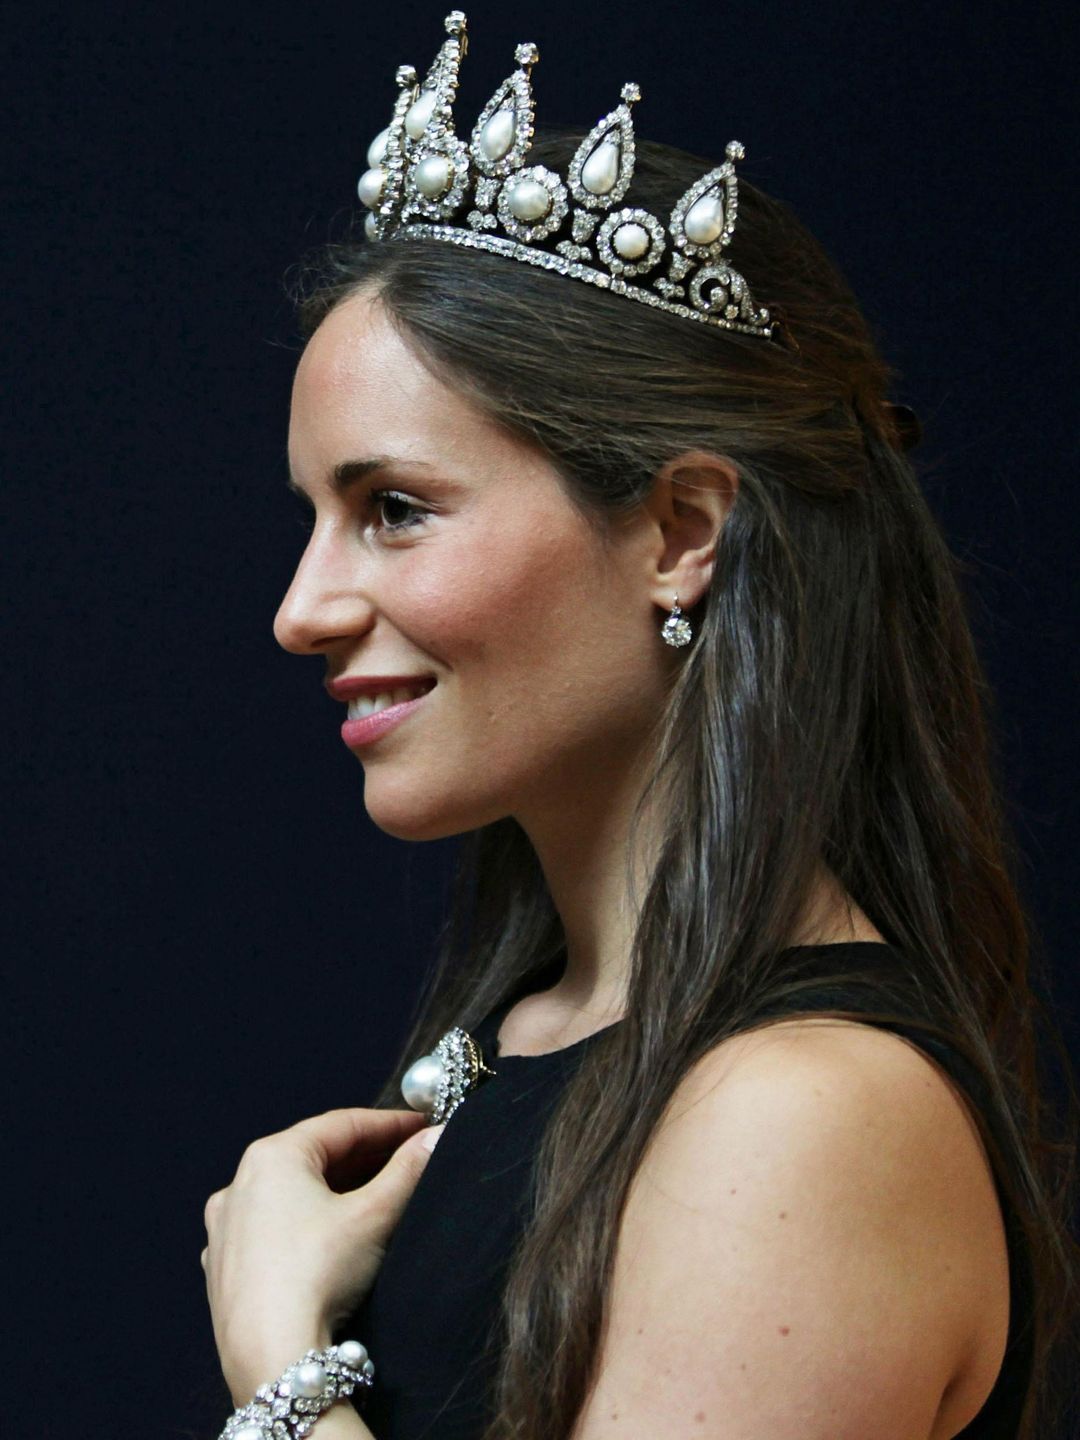 A model wearing the Rosebery tiara, ahead of the 2011 'Important Jewels Sale' at Christie's auction house